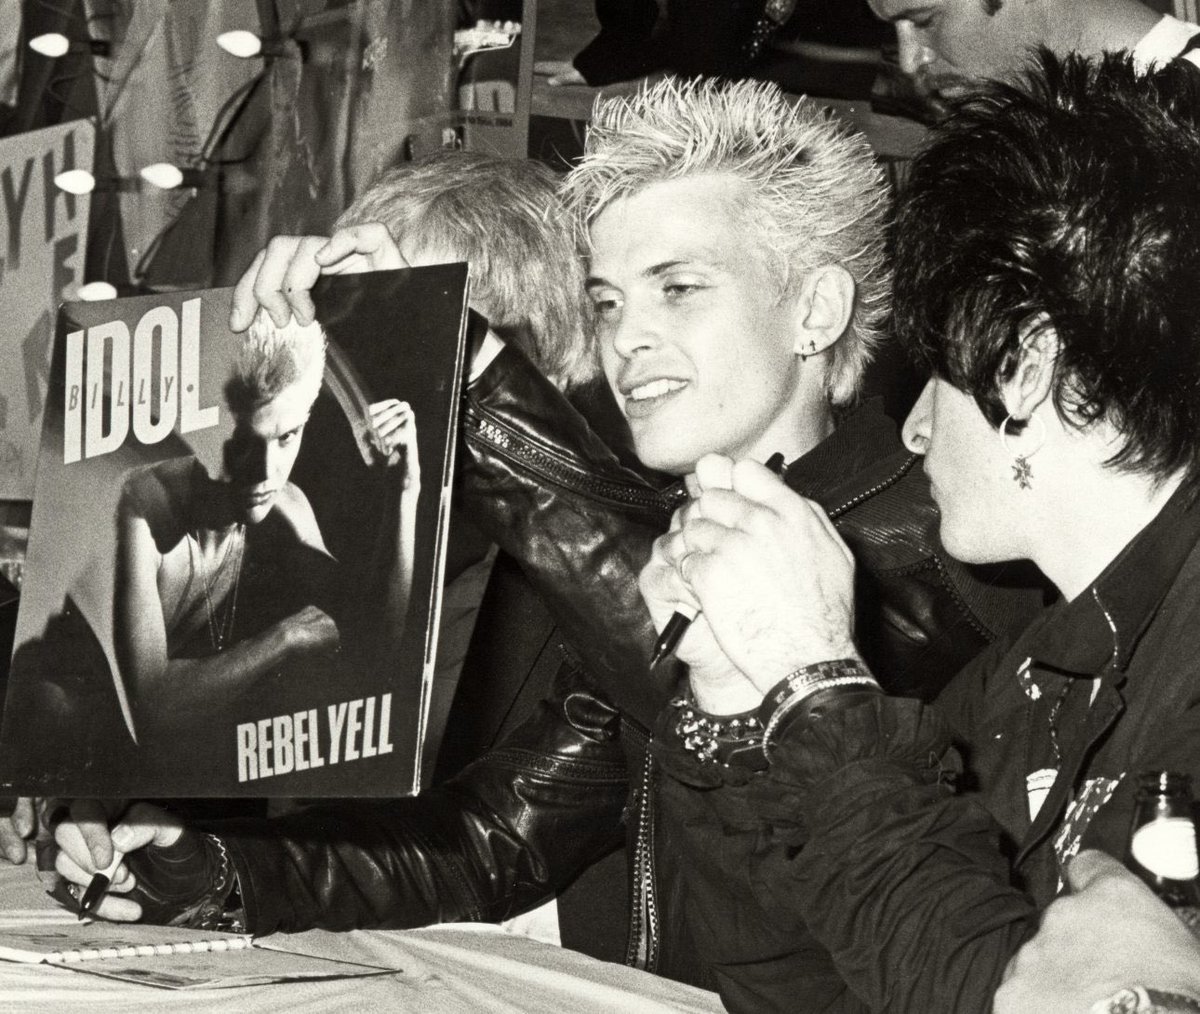 Billy Idol and Steve Stevens at a promo signing for Rebel Yell in Hollywood, March 1984, photographed by Ron Galella. And below in a video for the expanded re-release… Still rocking it to the max! ✊🏻 #IdolSunday #BillyIdol #RebelYell